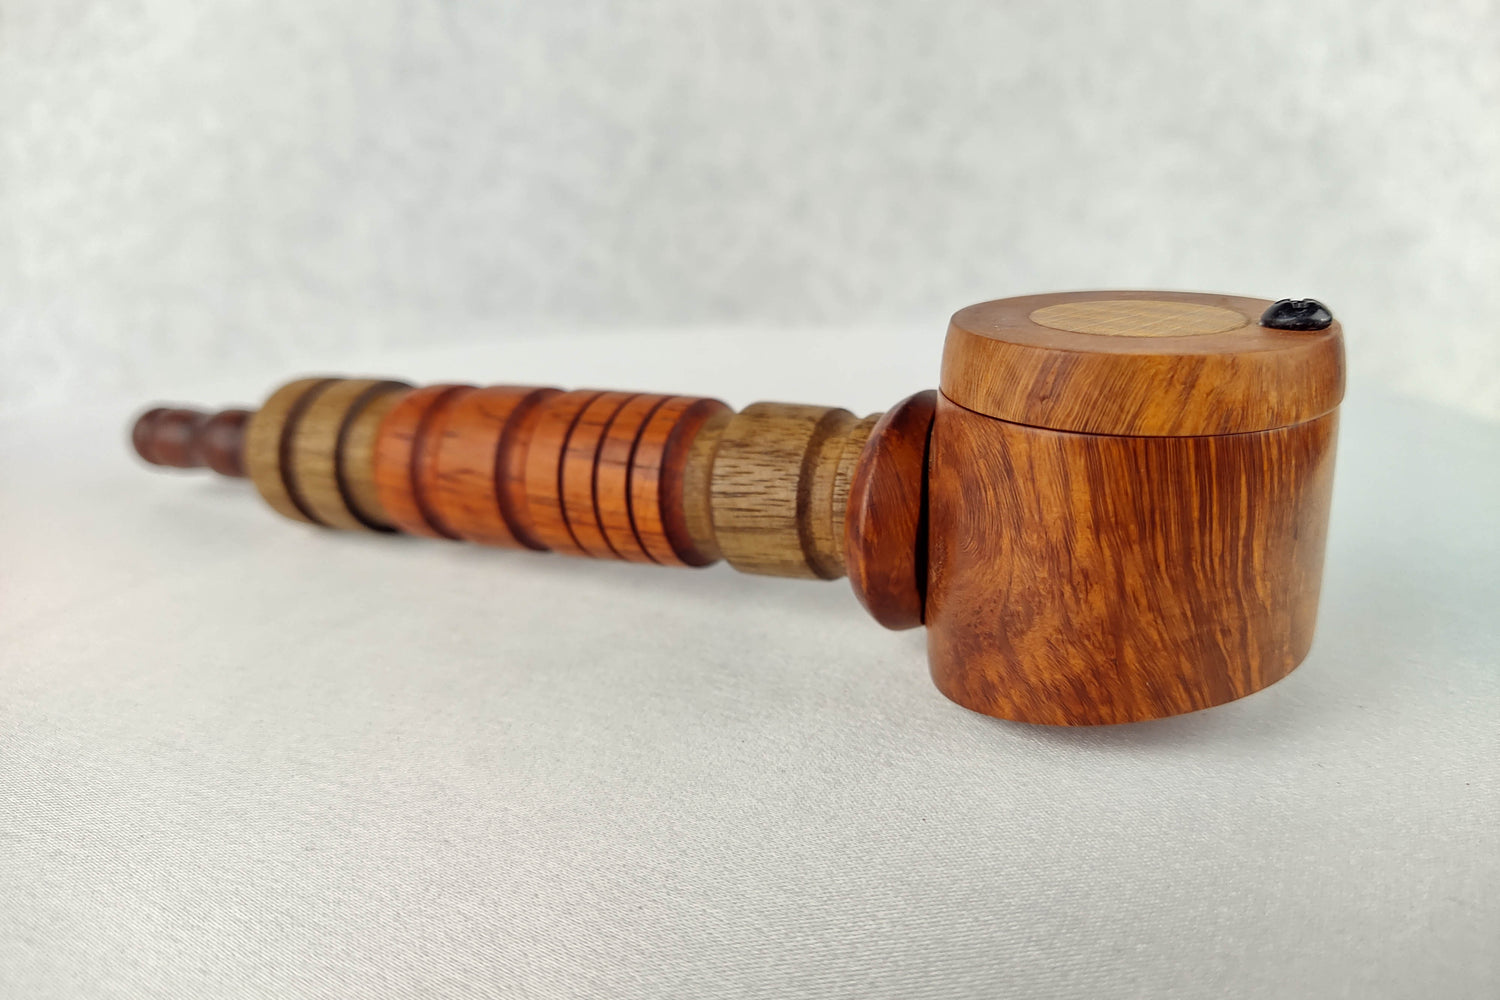 Hybrid Pipe H1 - Wood Pipe with Glass Bowl